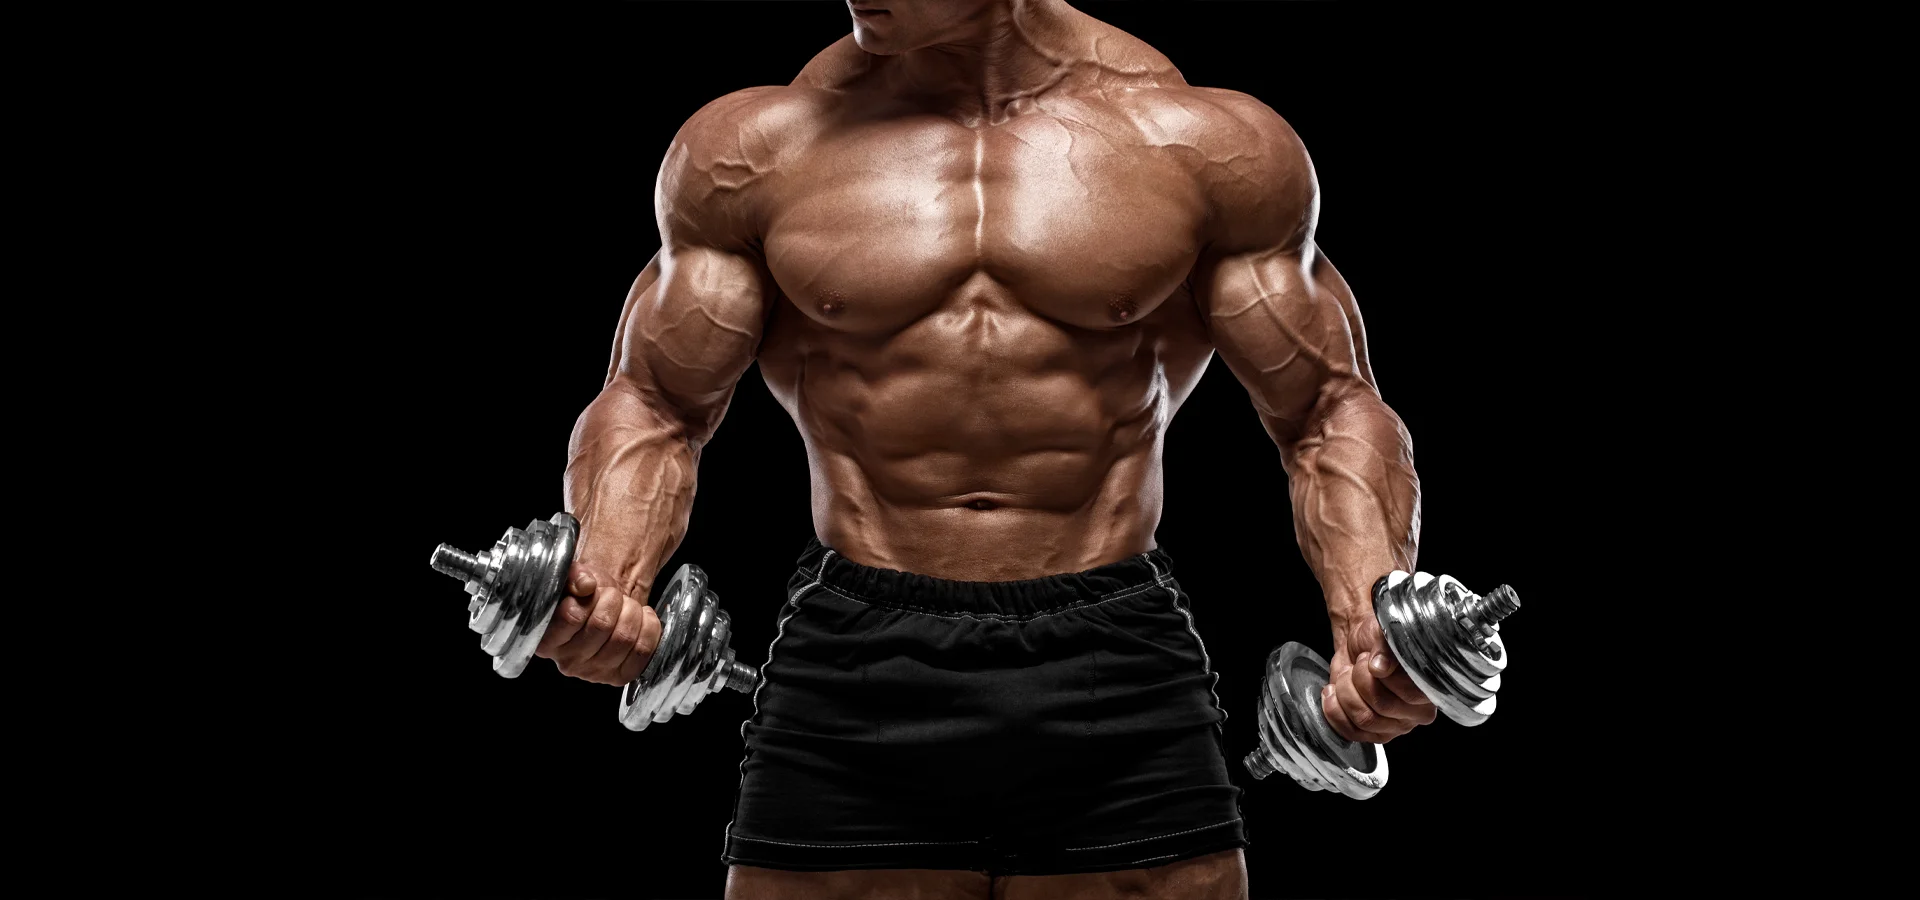 Testosterone propionate - What is it?